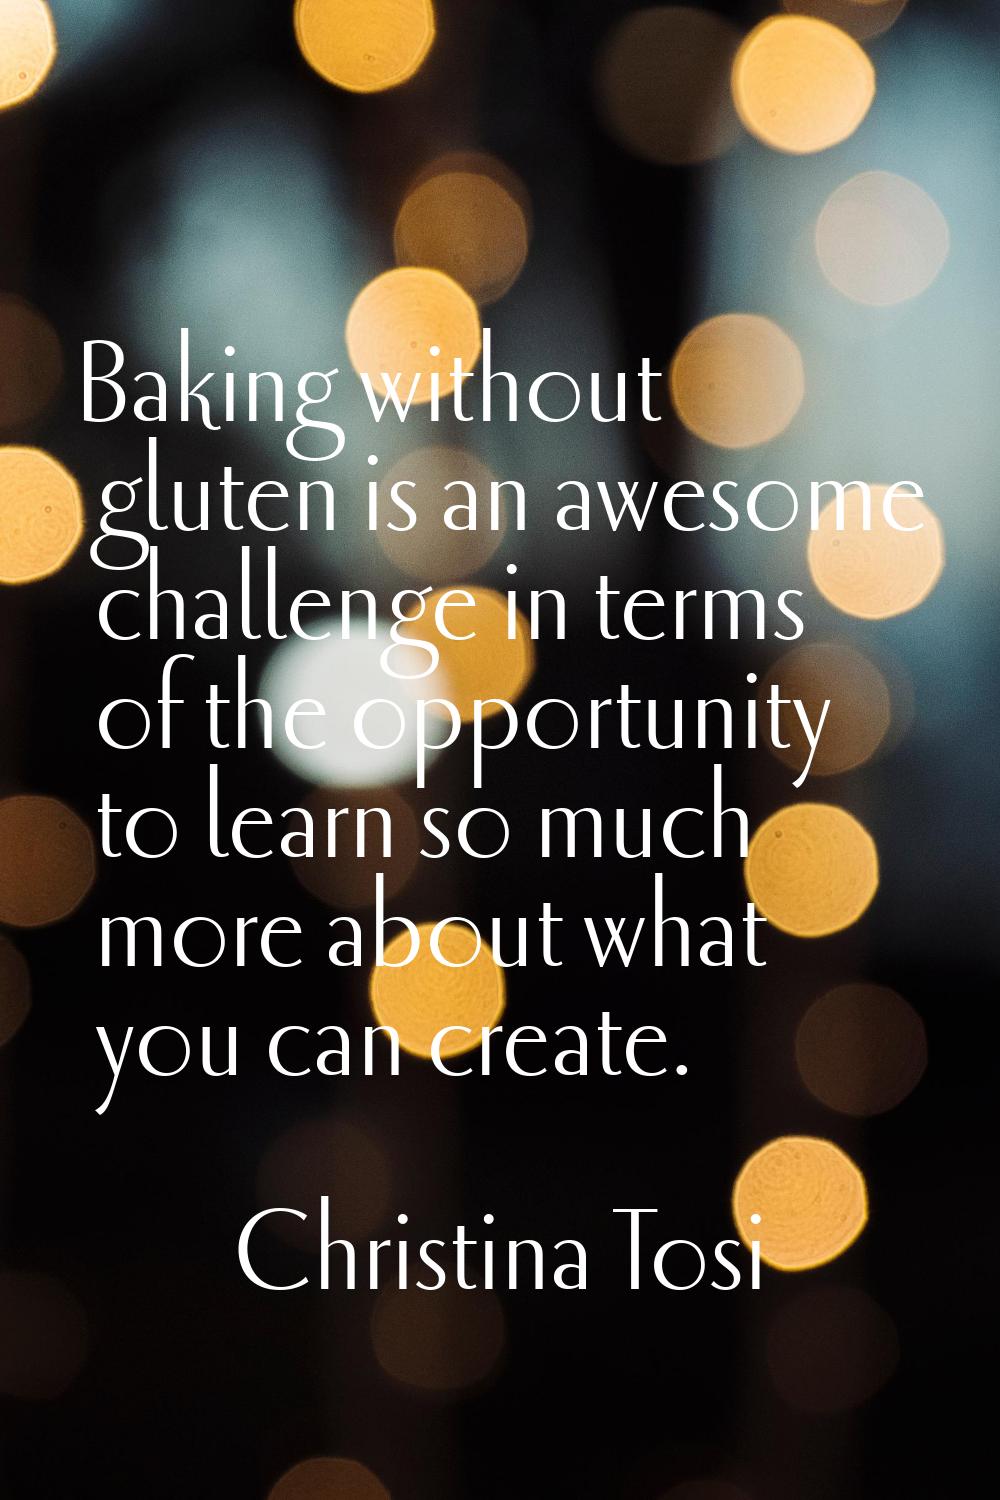 Baking without gluten is an awesome challenge in terms of the opportunity to learn so much more abo